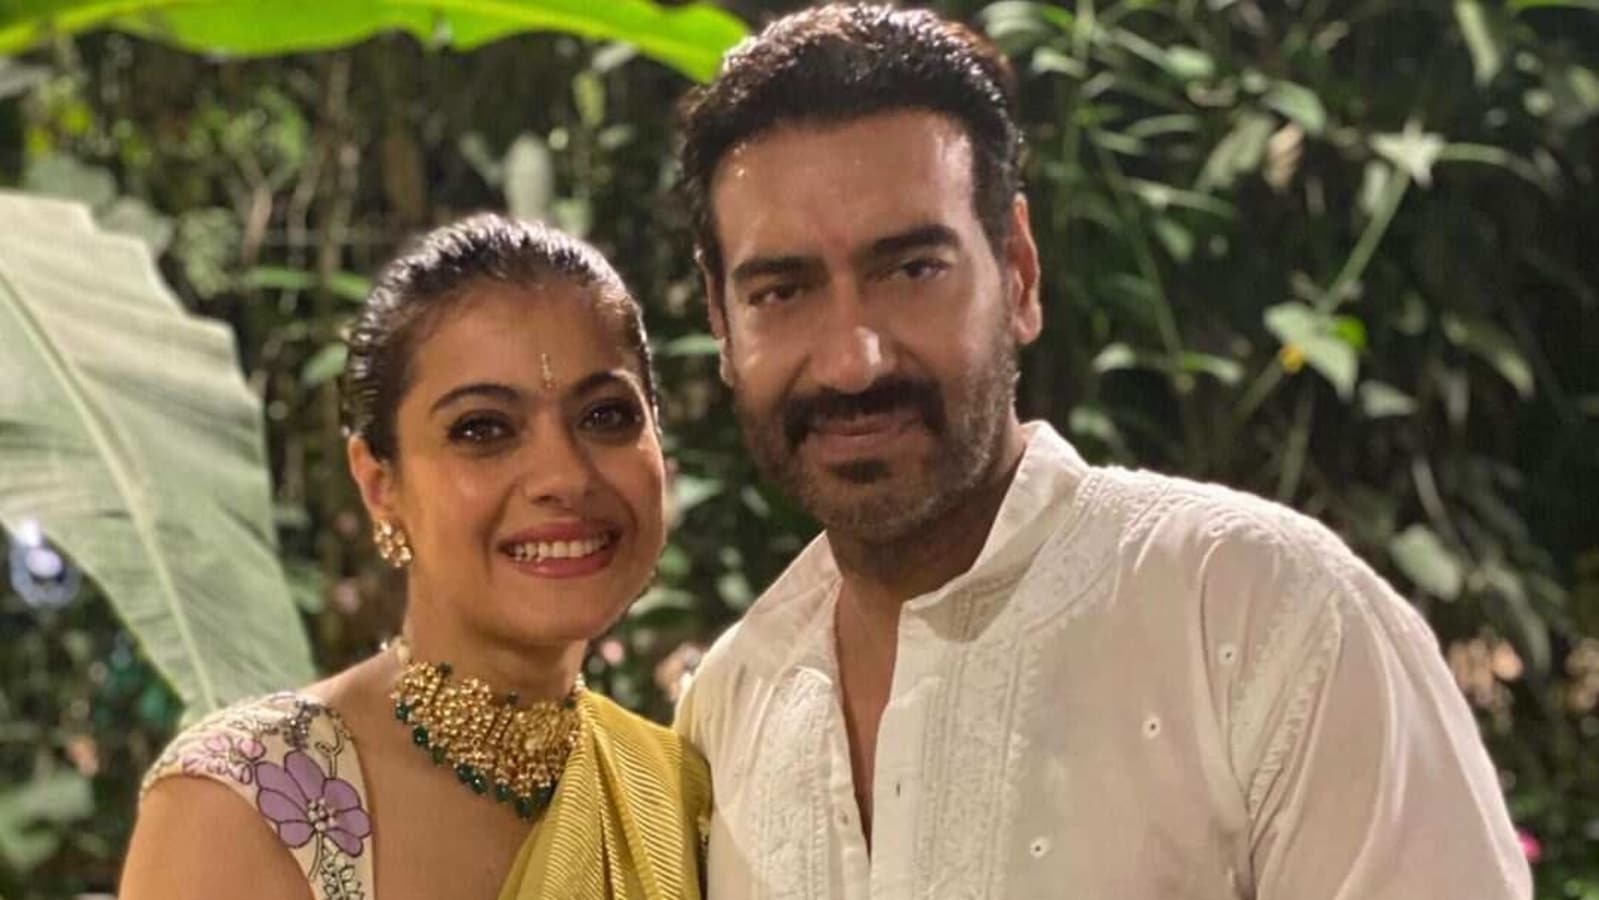 Kajol And Ajay Xxx Video - Ajay Devgn once confessed he disliked Kajol after their first meeting: 'I  wasn't very keen to meet her after that' | Bollywood - Hindustan Times